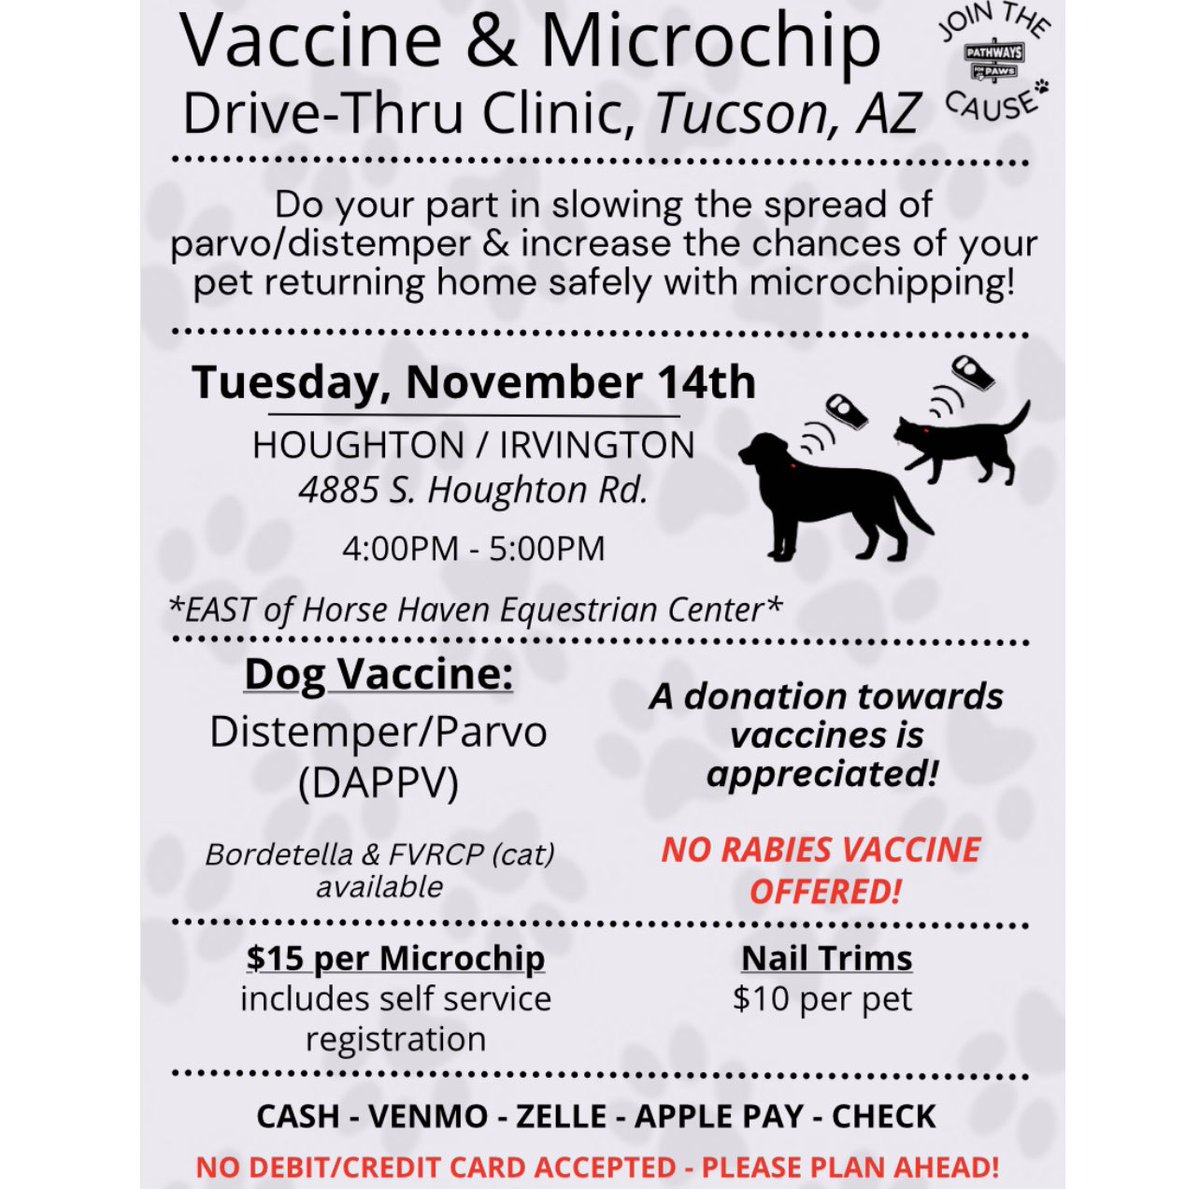 🕓 TIME CHANGE 🕓 With the sun setting sooner, we have changed our EAST SIDE Drive-Thru Vaccine & Microchip Clinic time to start at 4pm 🐾 Please share to spread the news on the time change & we will see you this Tuesday, November 14th from 4-5pm! @whatsuptucson